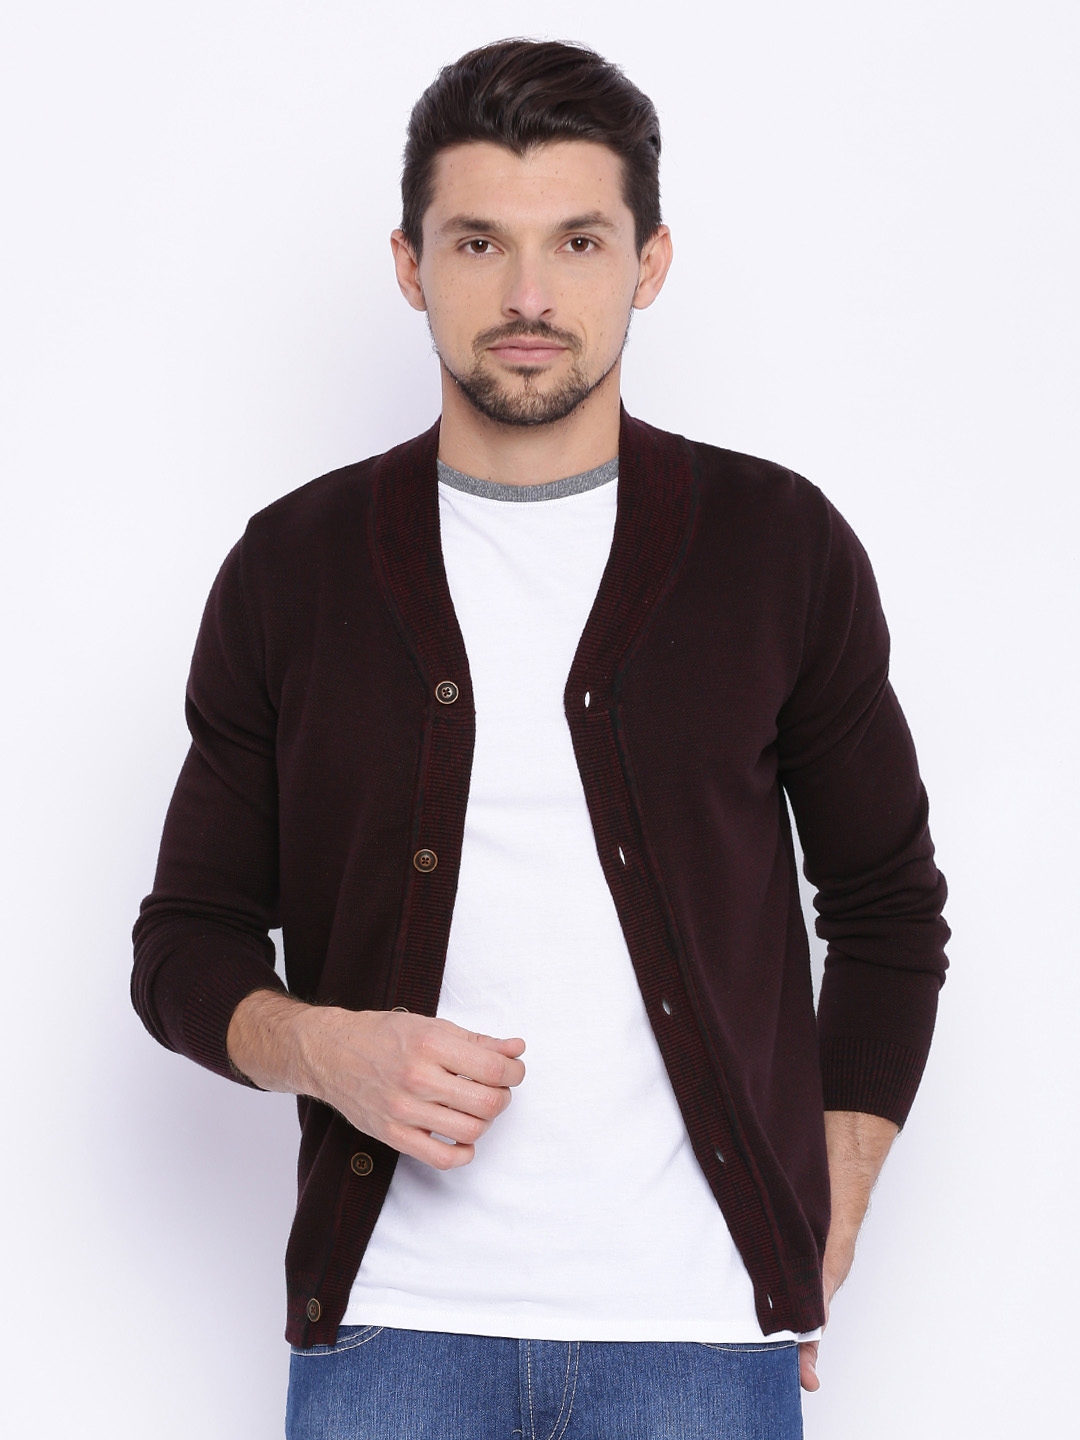 Buy Basics Red Cardigan - Sweaters for Men 1702316 | Myntra